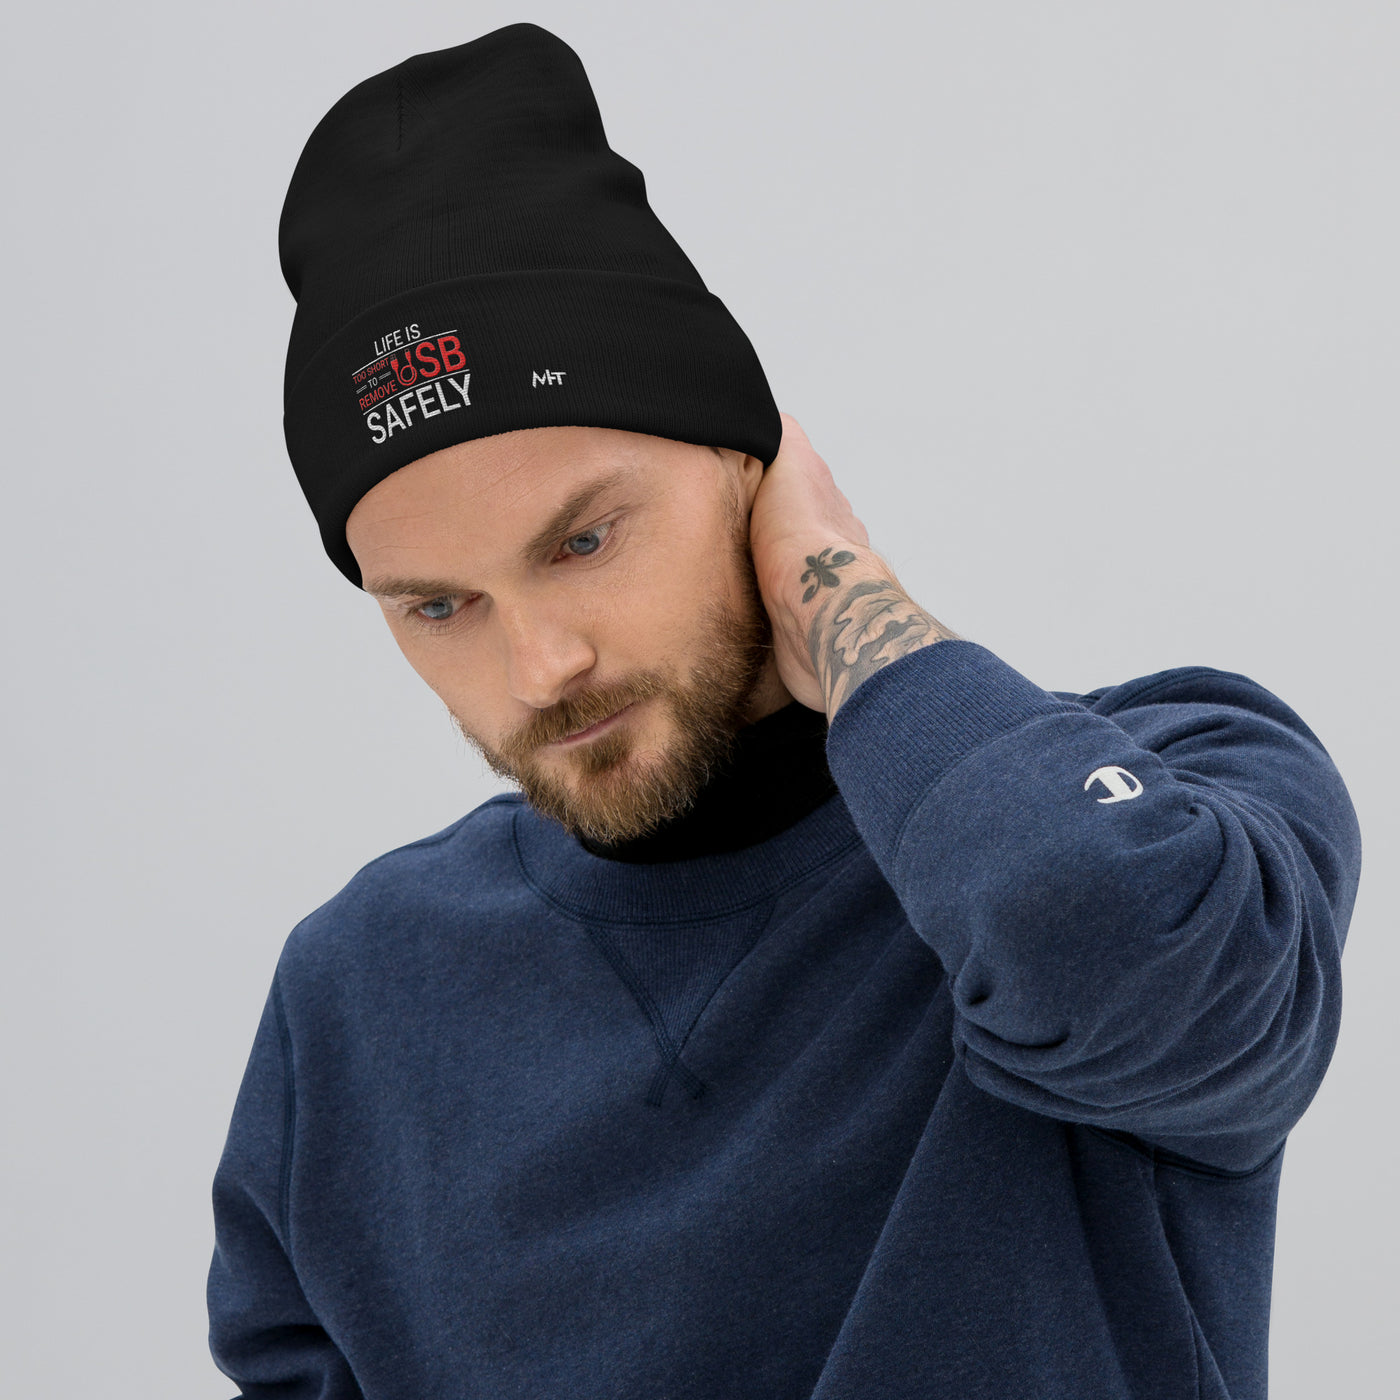 Life is too Short to Remove USB Safely - Embroidered Beanie